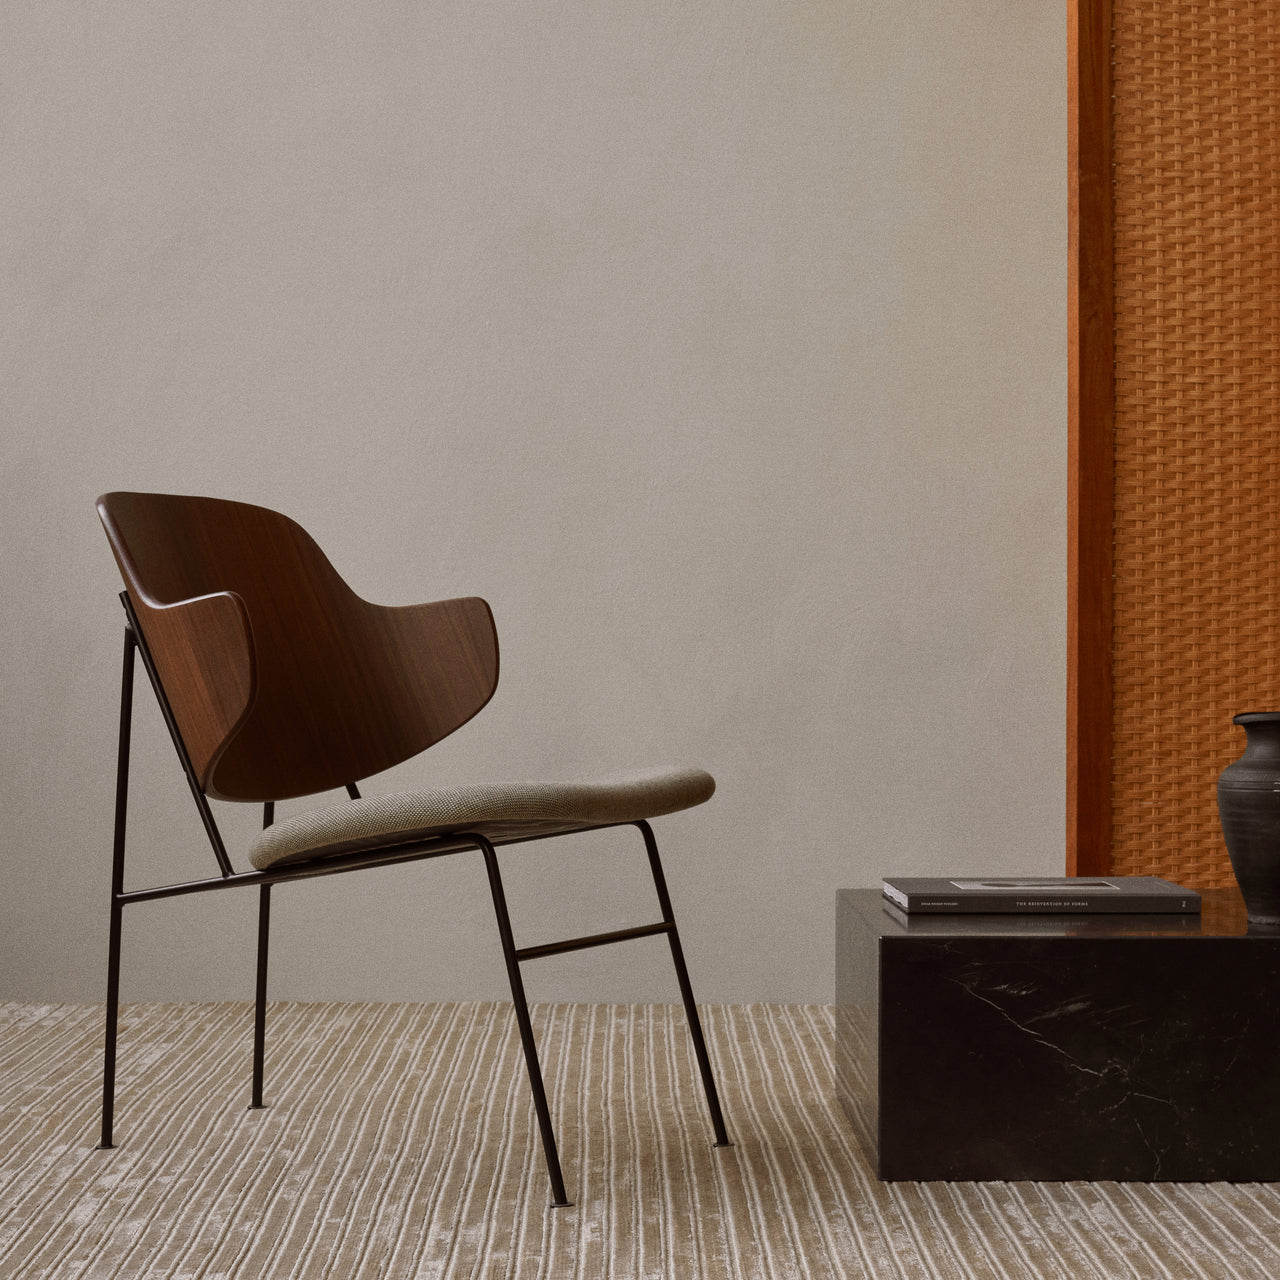 The Penguin Lounge Chair: Upholstered